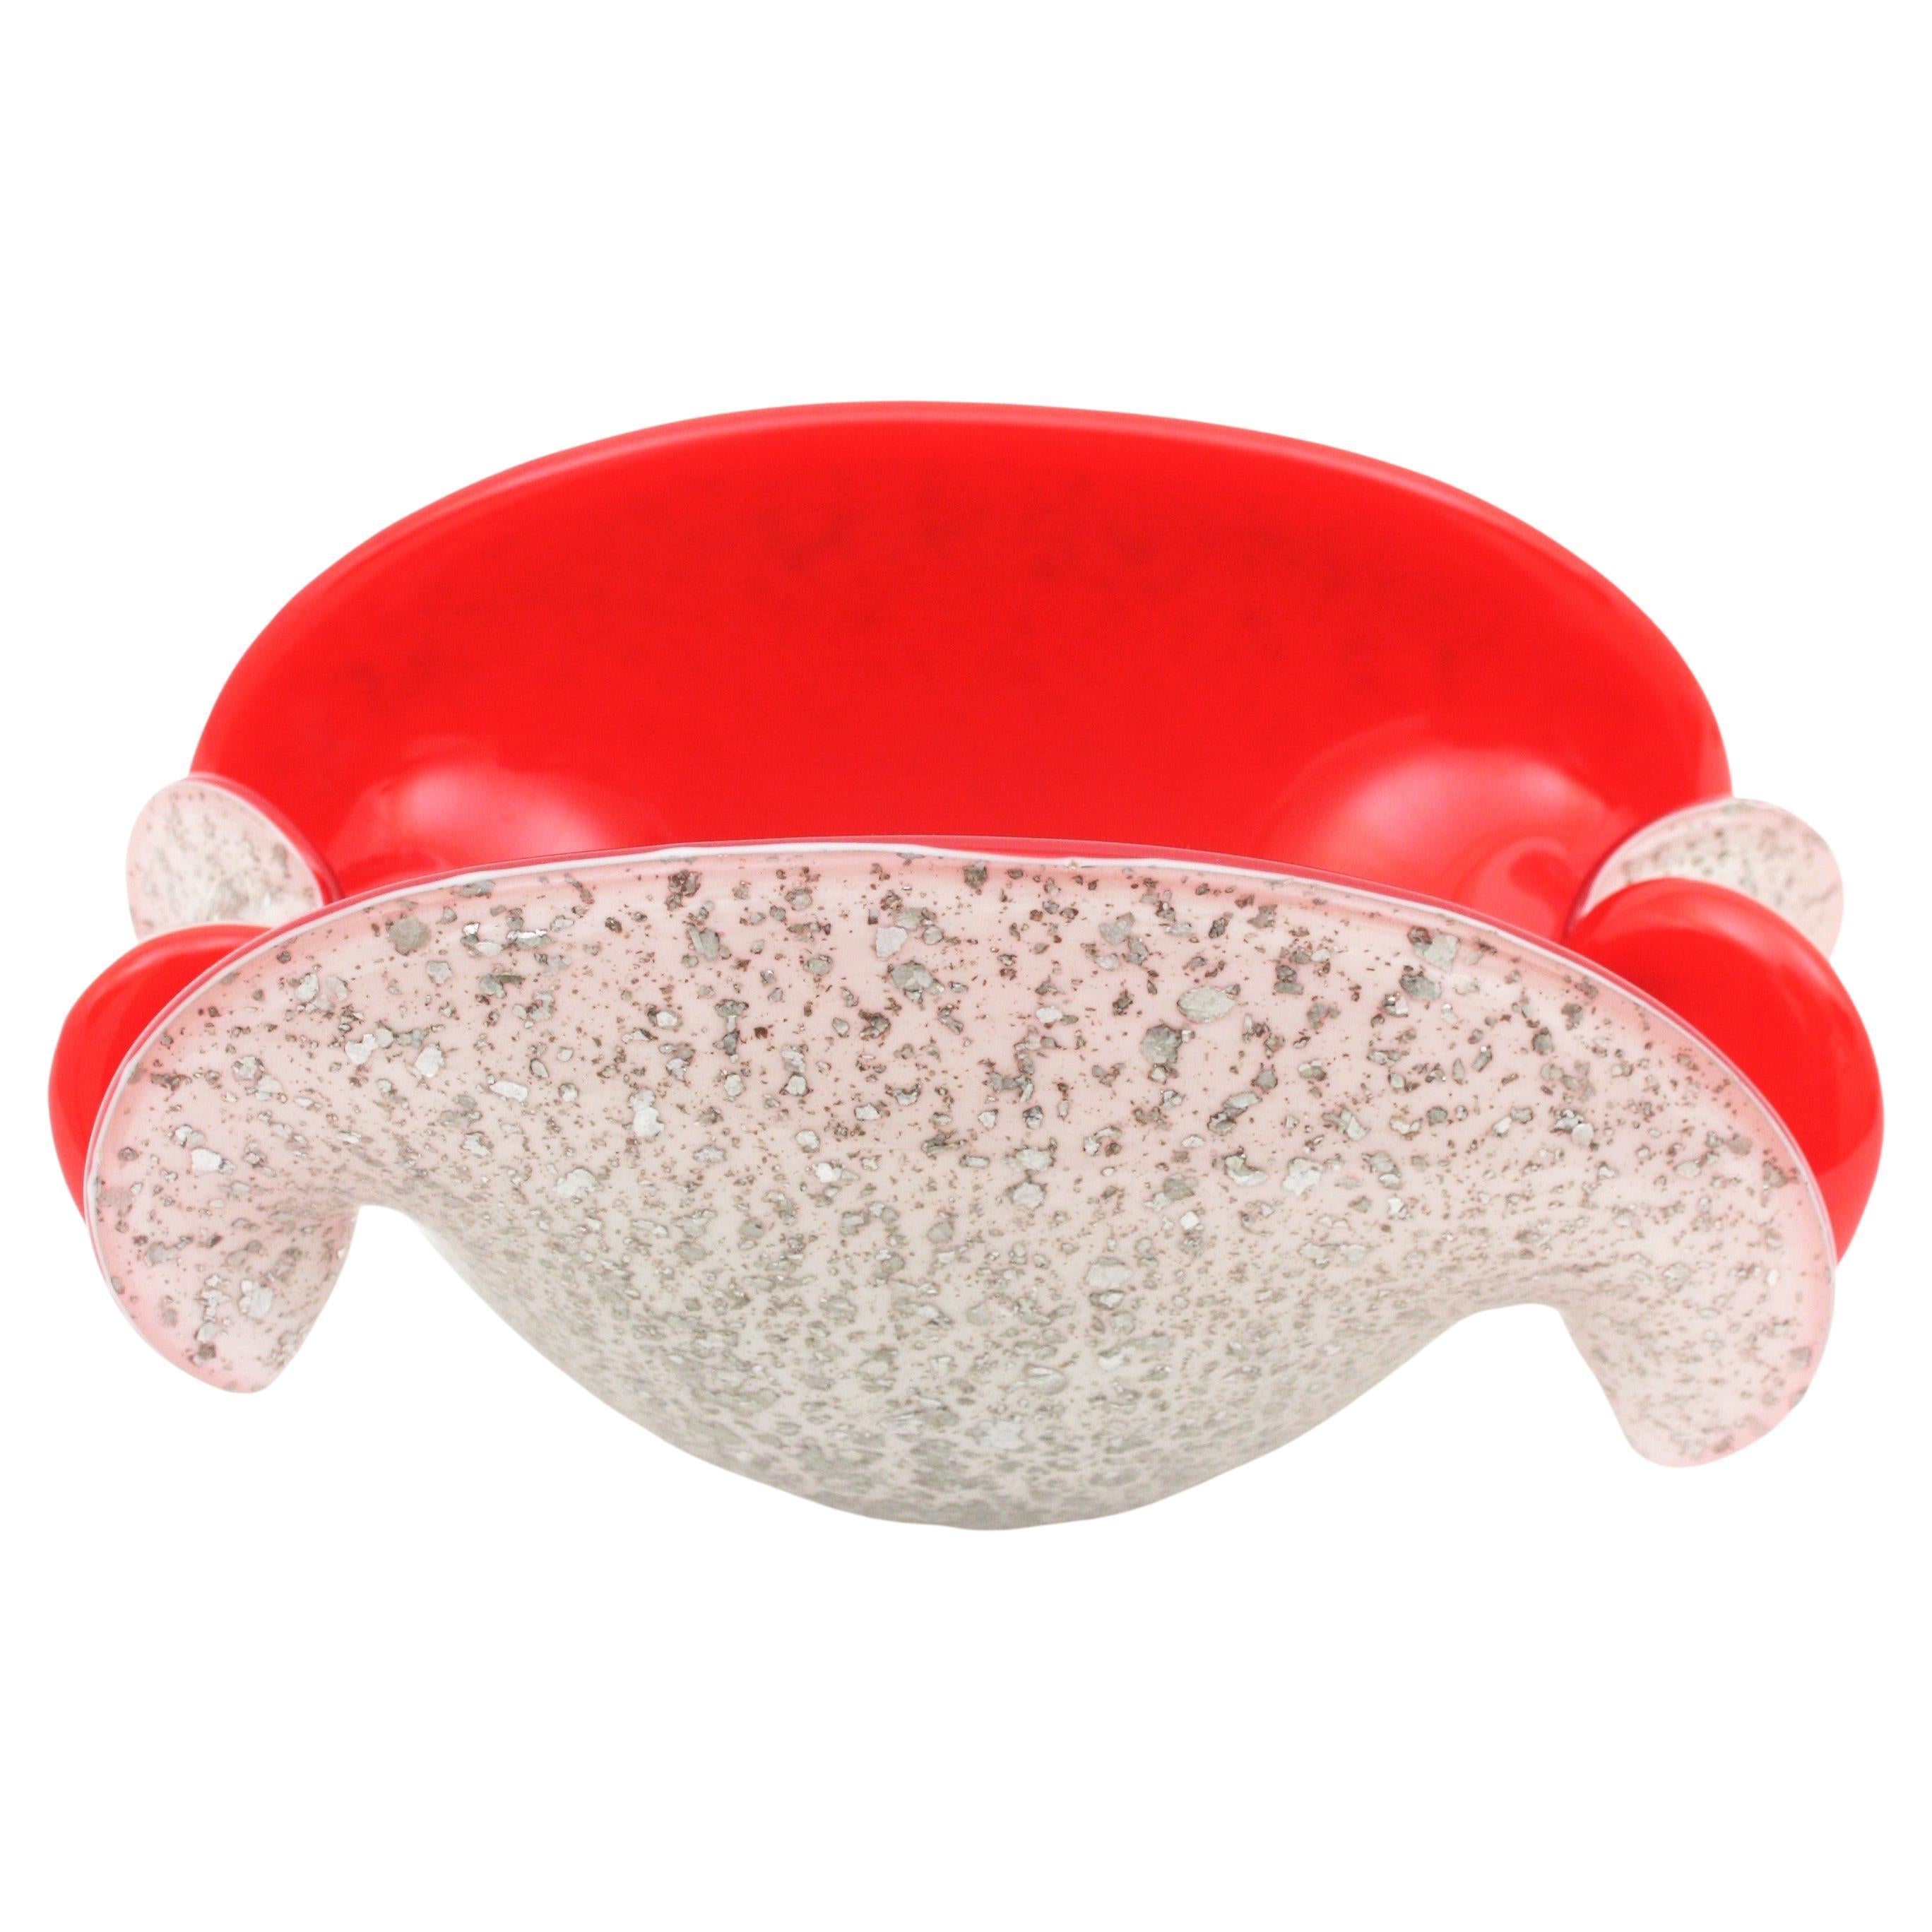 Monumental hand blown Murano art glass clam shell bowl / ashtray in red and white with silver flecks inclusions. Attributed Seguso company, Italy, 1950s.
Red glass cased into white glass, and silver aventurine flecks.
Unusual large